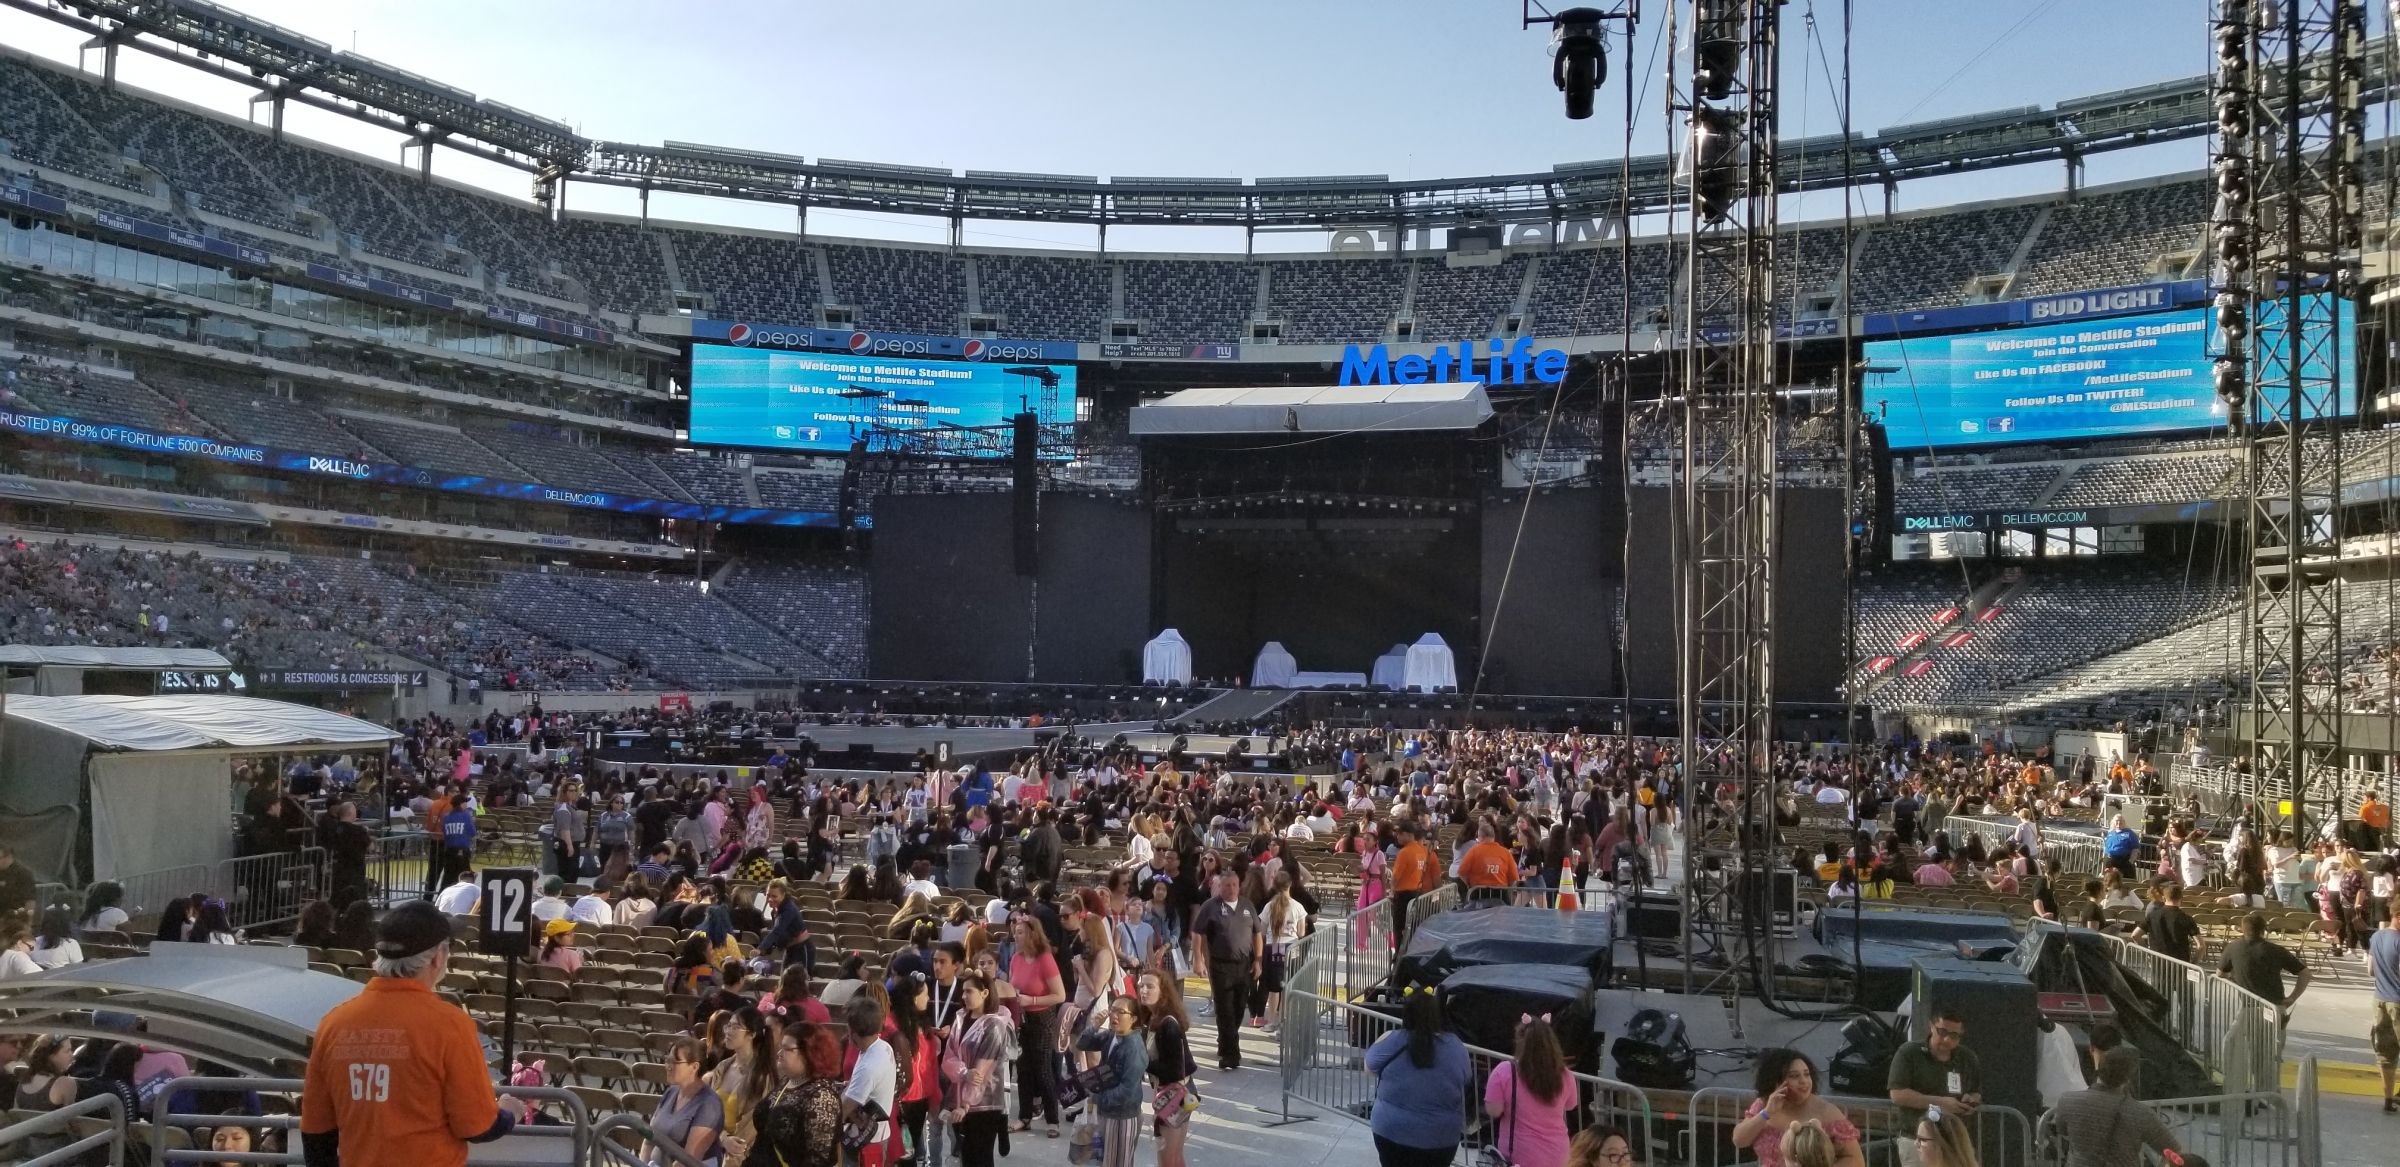 section 123, row 5 seat view  for concert - metlife stadium